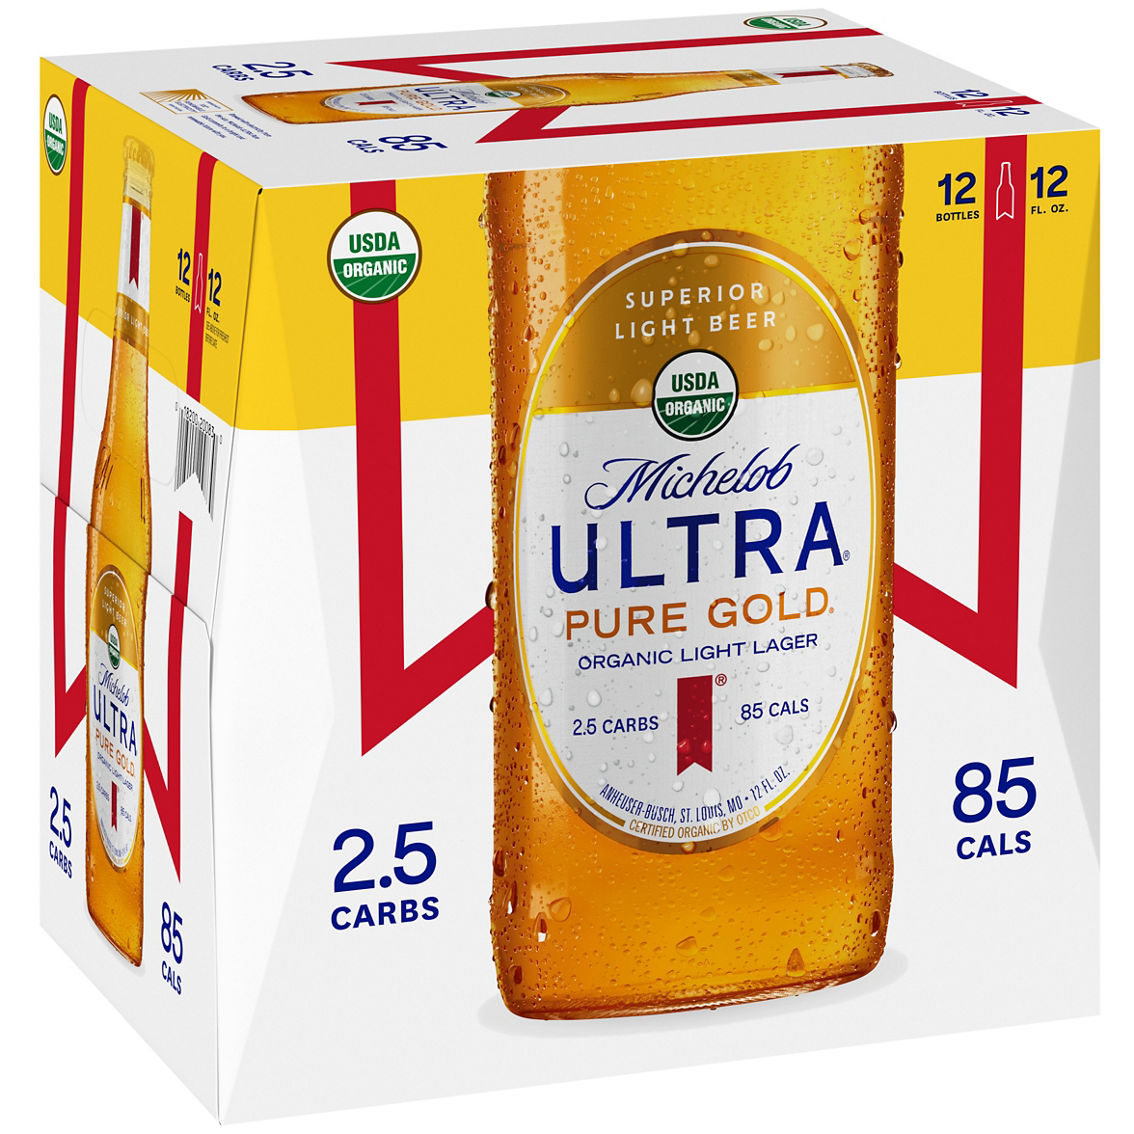 Michelob Ultra Pure Gold 12 oz. Bottle 12 pk. - Image 2 of 2